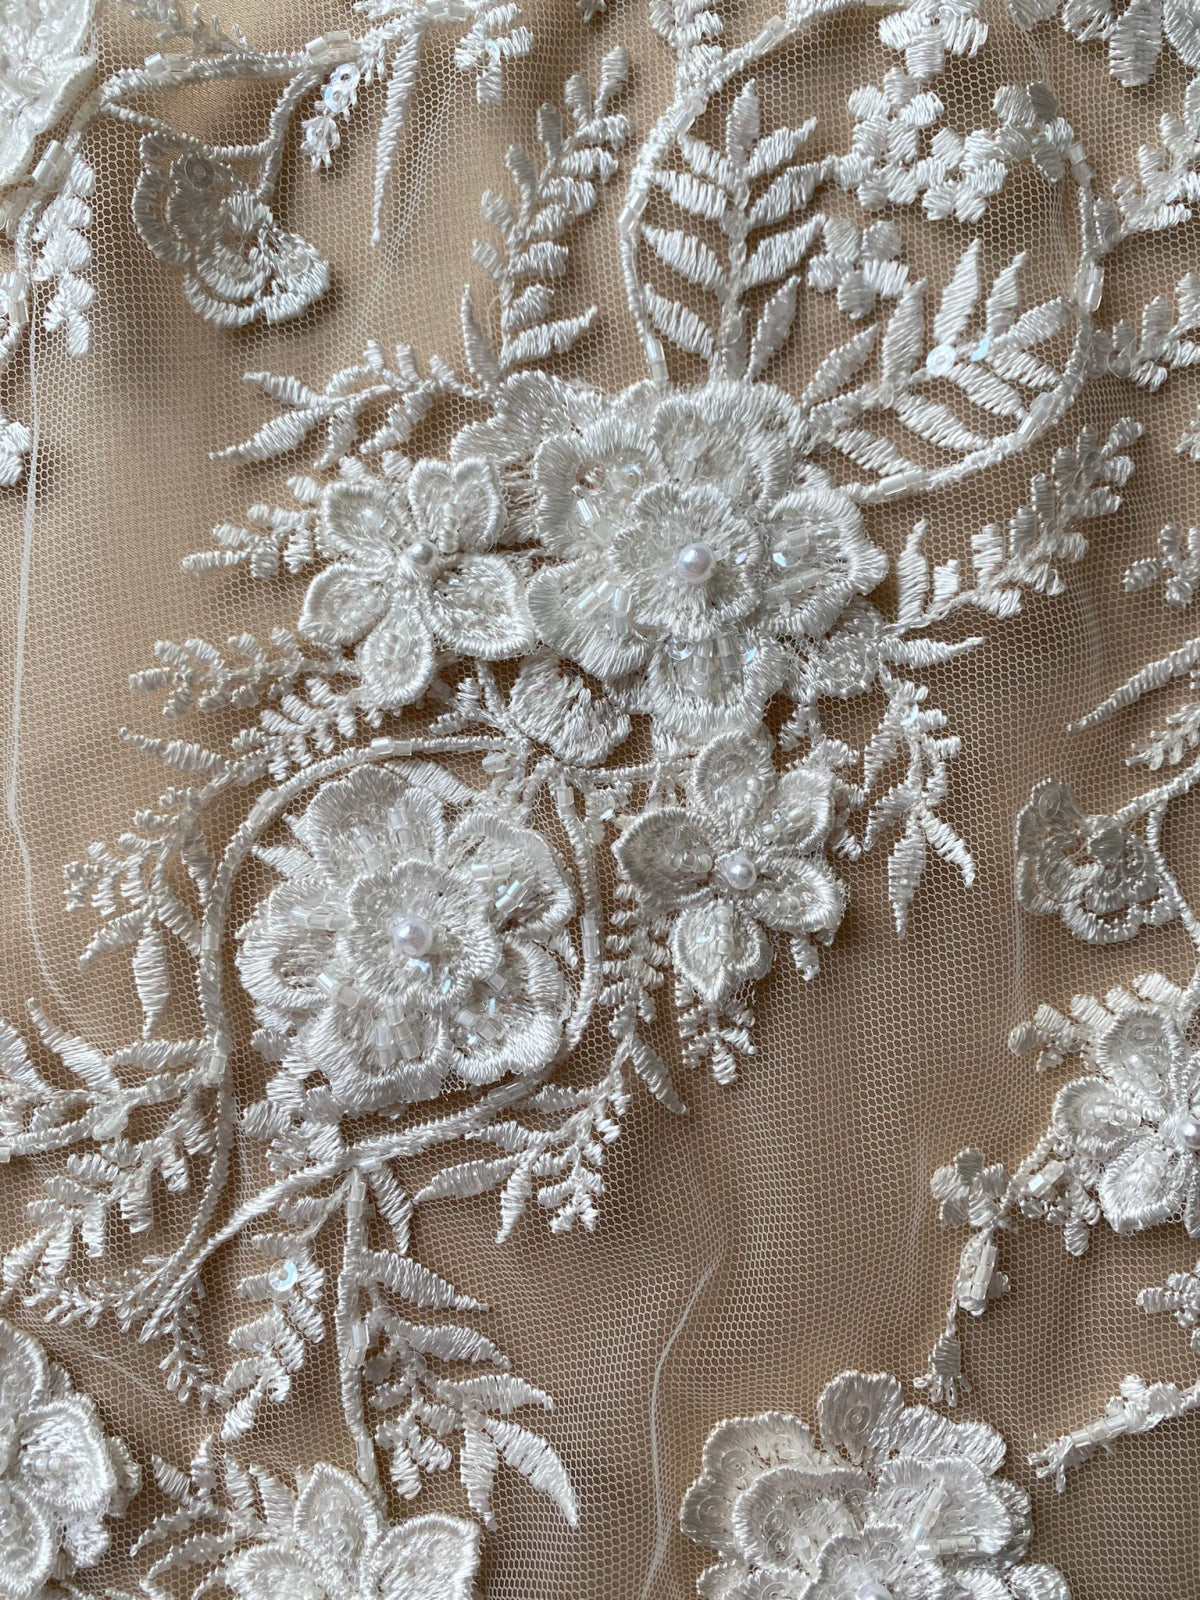 Lace with Floral Pattern, with 3D Flowers, Sided Pearls and Sequins